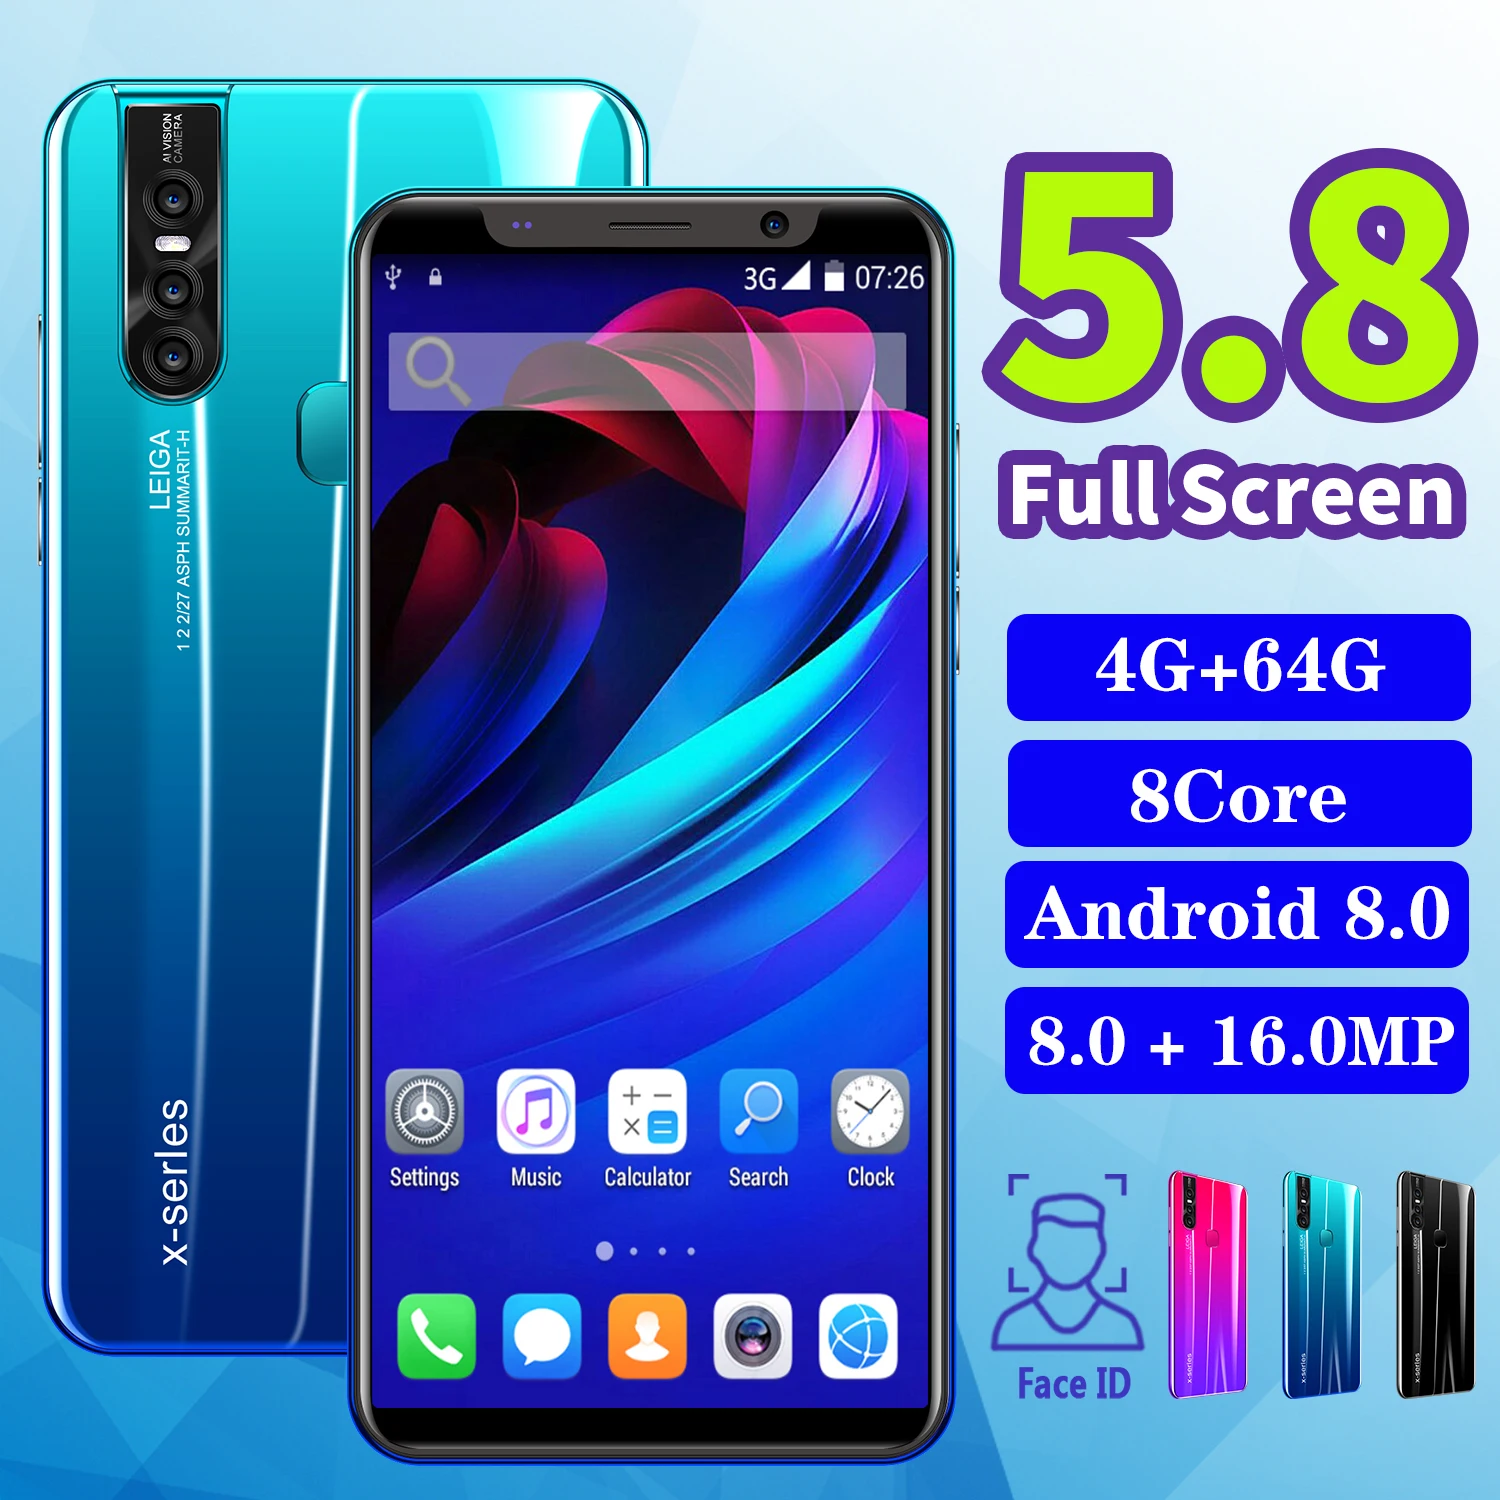 

Global Version Smartphone X27 Plus 5.8 Inch HD Full Screen 4GB + 64GB 4800mAh Supports Facial Recognition To Unlock Android